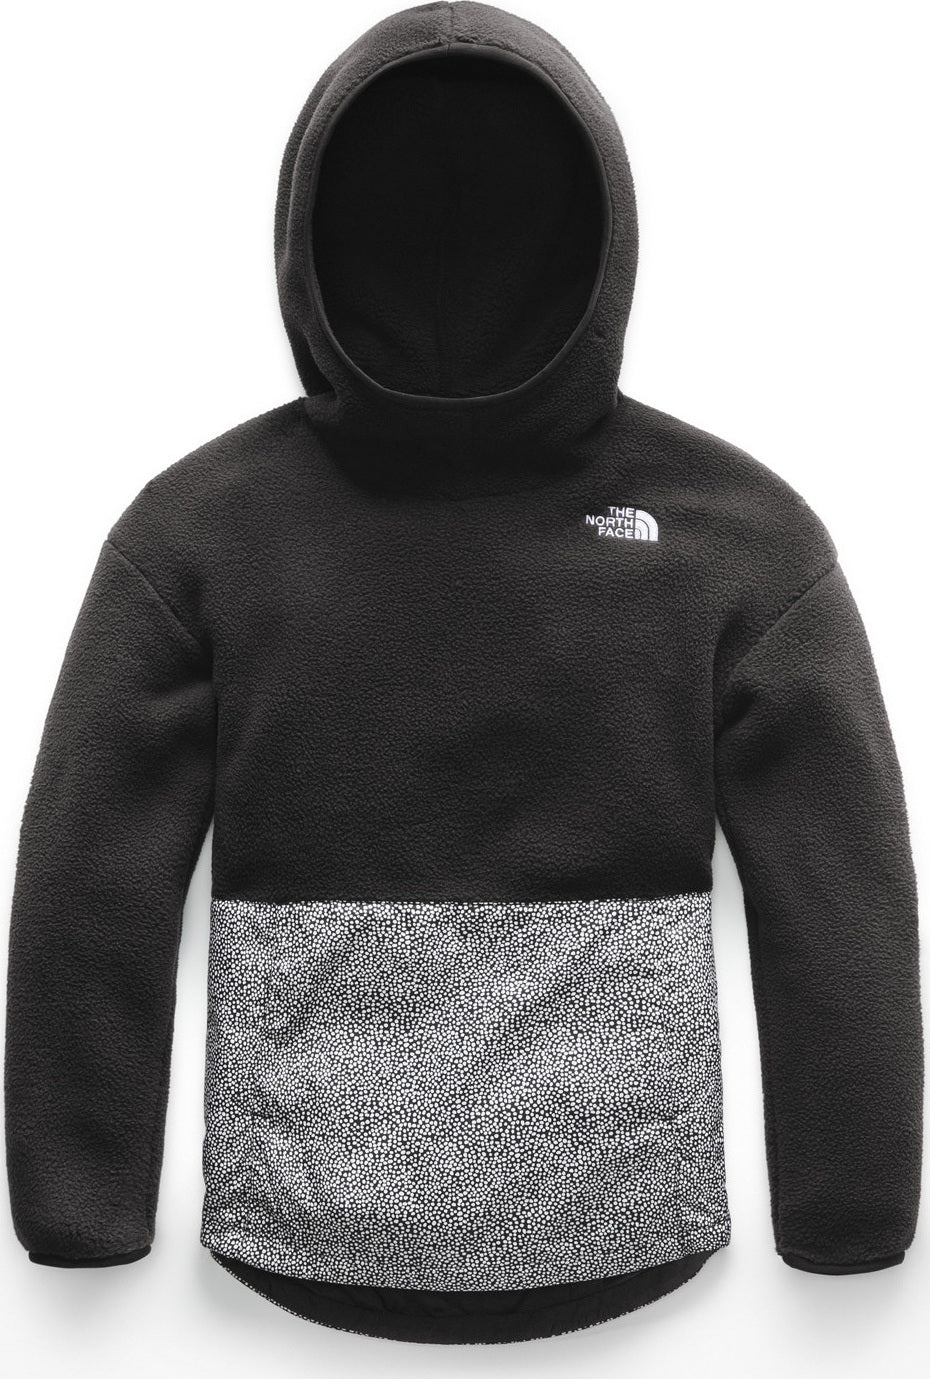 north face riit pullover